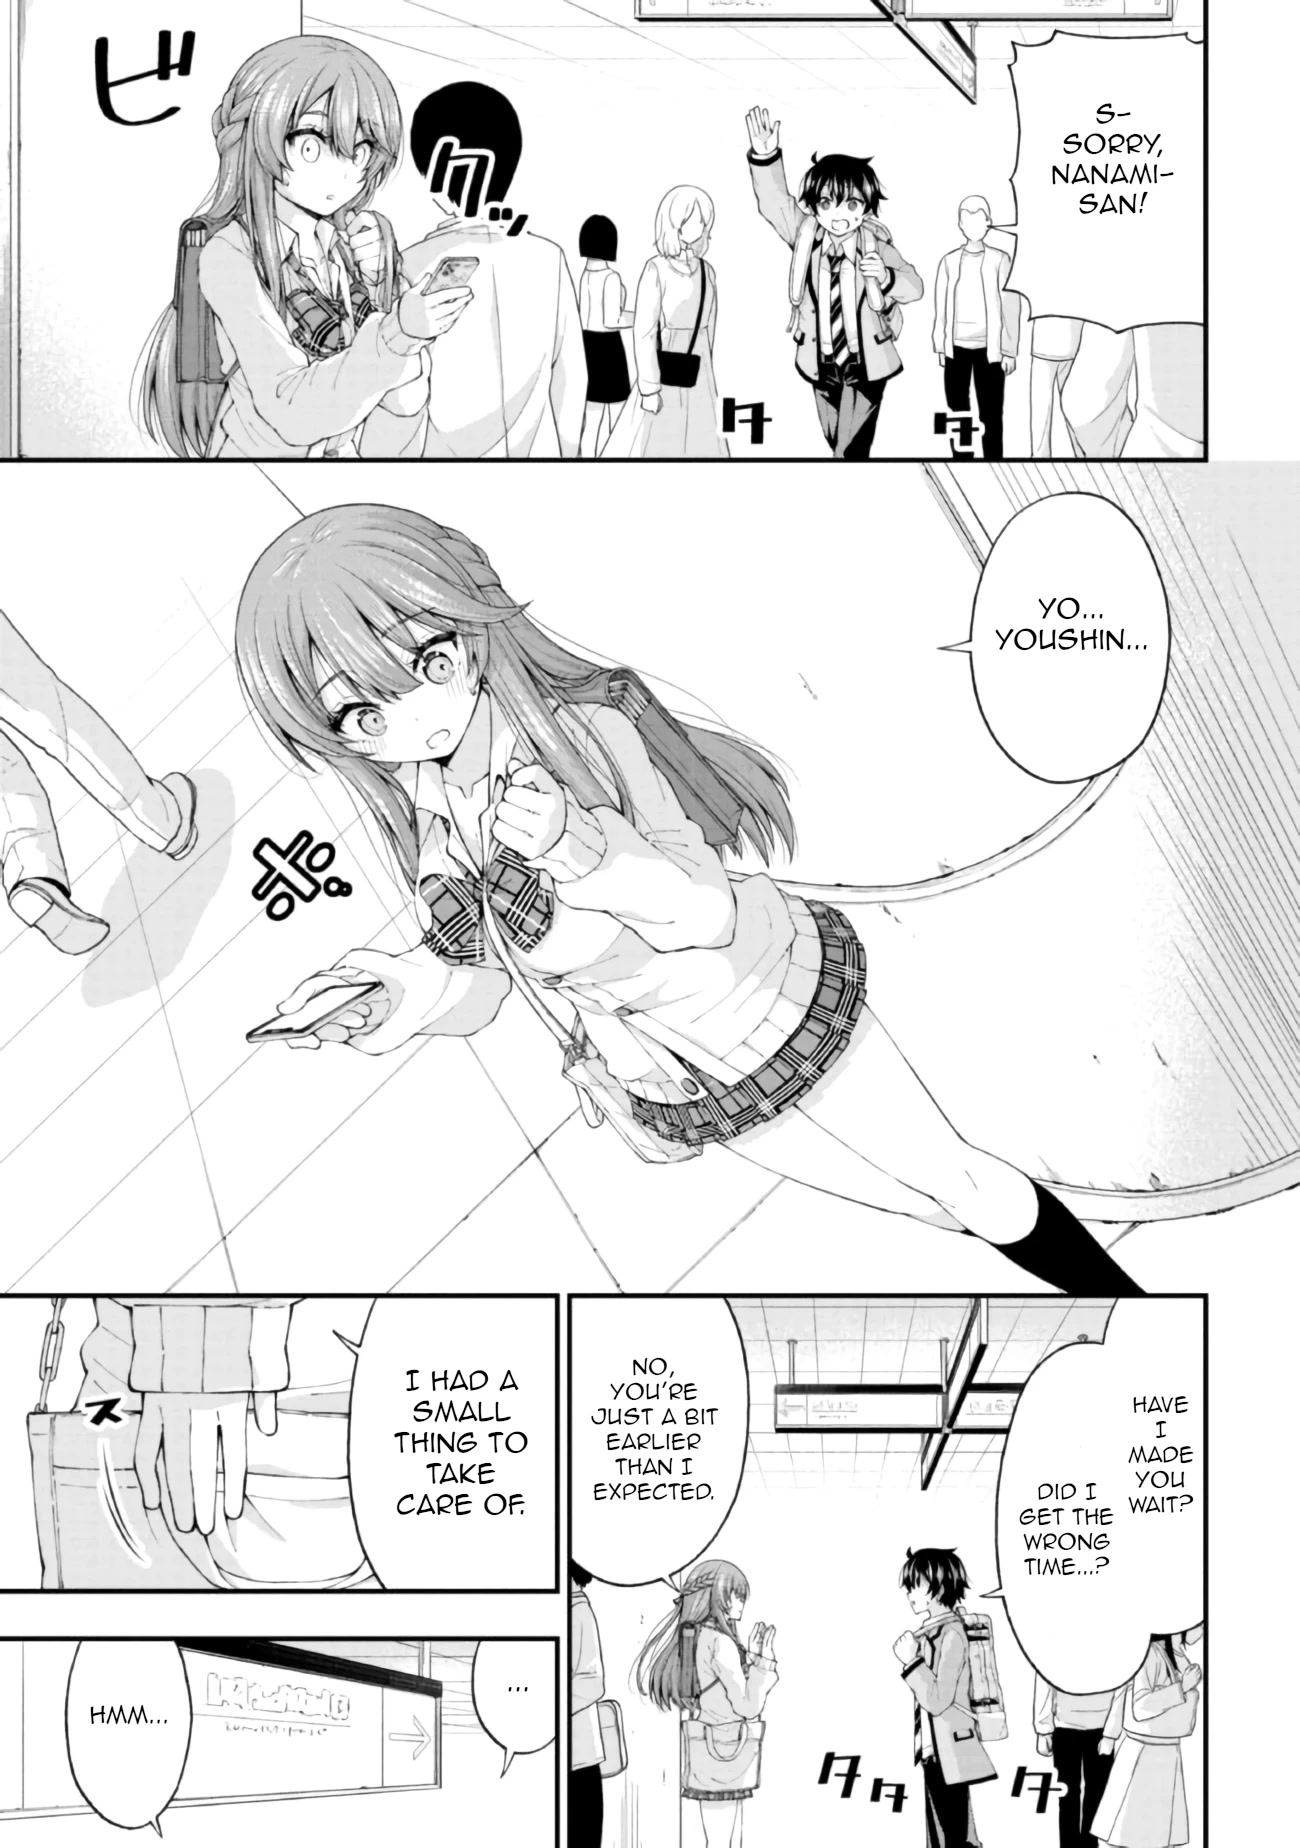 The Gal Who Was Meant To Confess To Me As A Game Punishment Has Apparently Fallen In Love With Me Chapter 3 #3